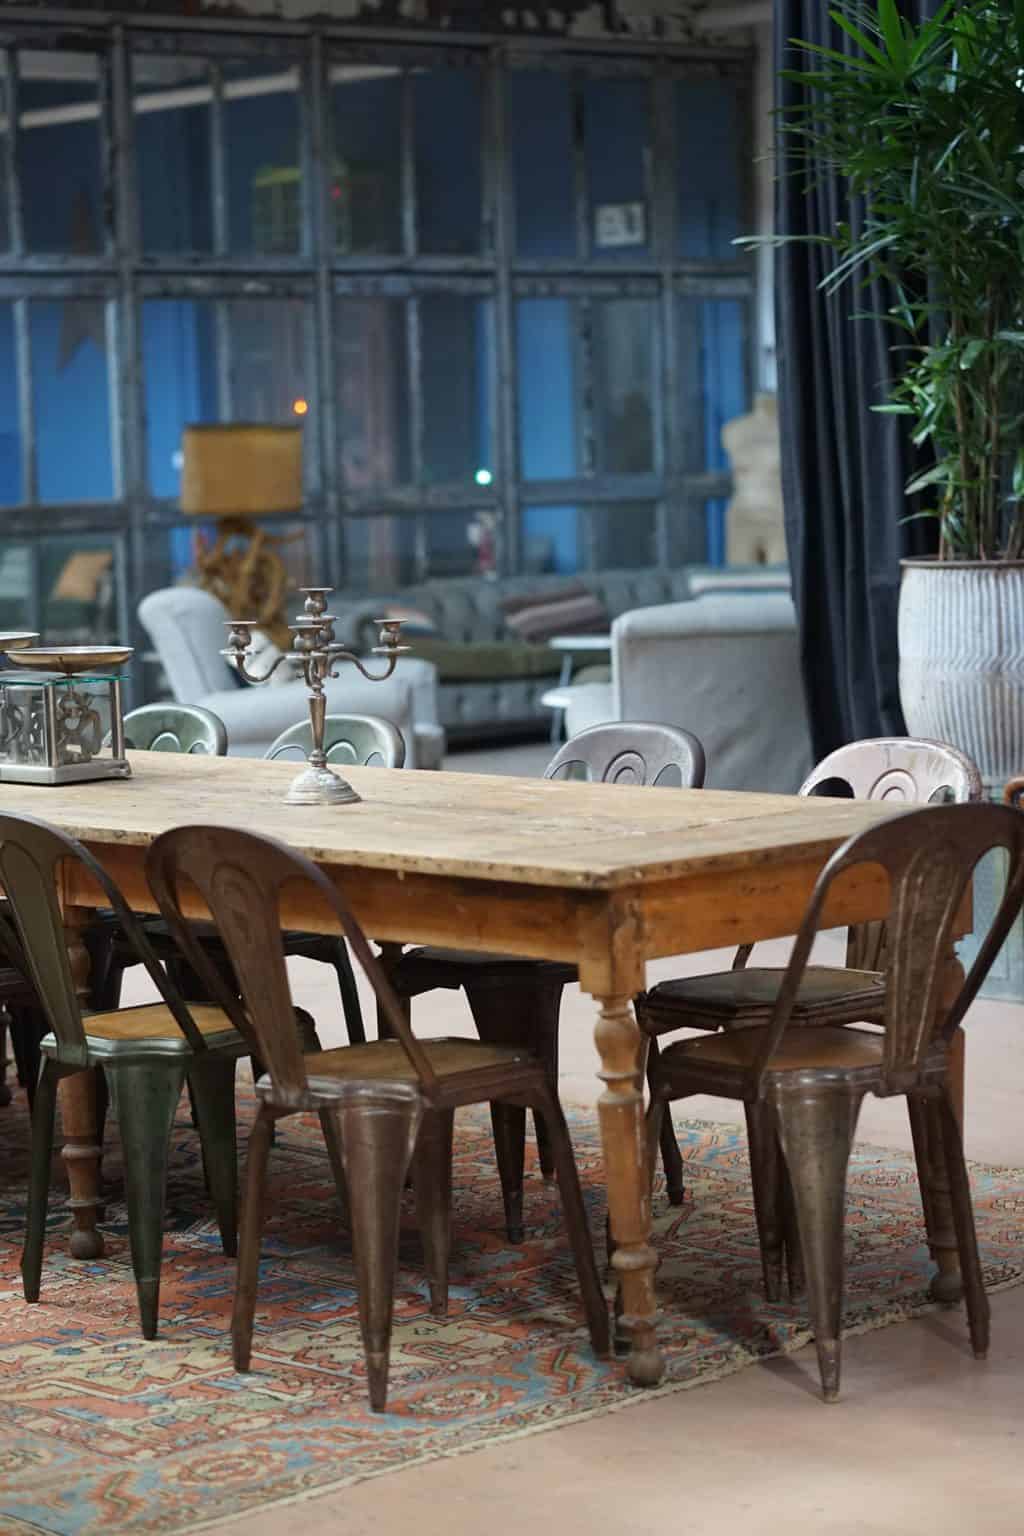 Finding old furniture doesn't have to be expensive or difficult. These tips and tricks will show you how to find old furniture. 